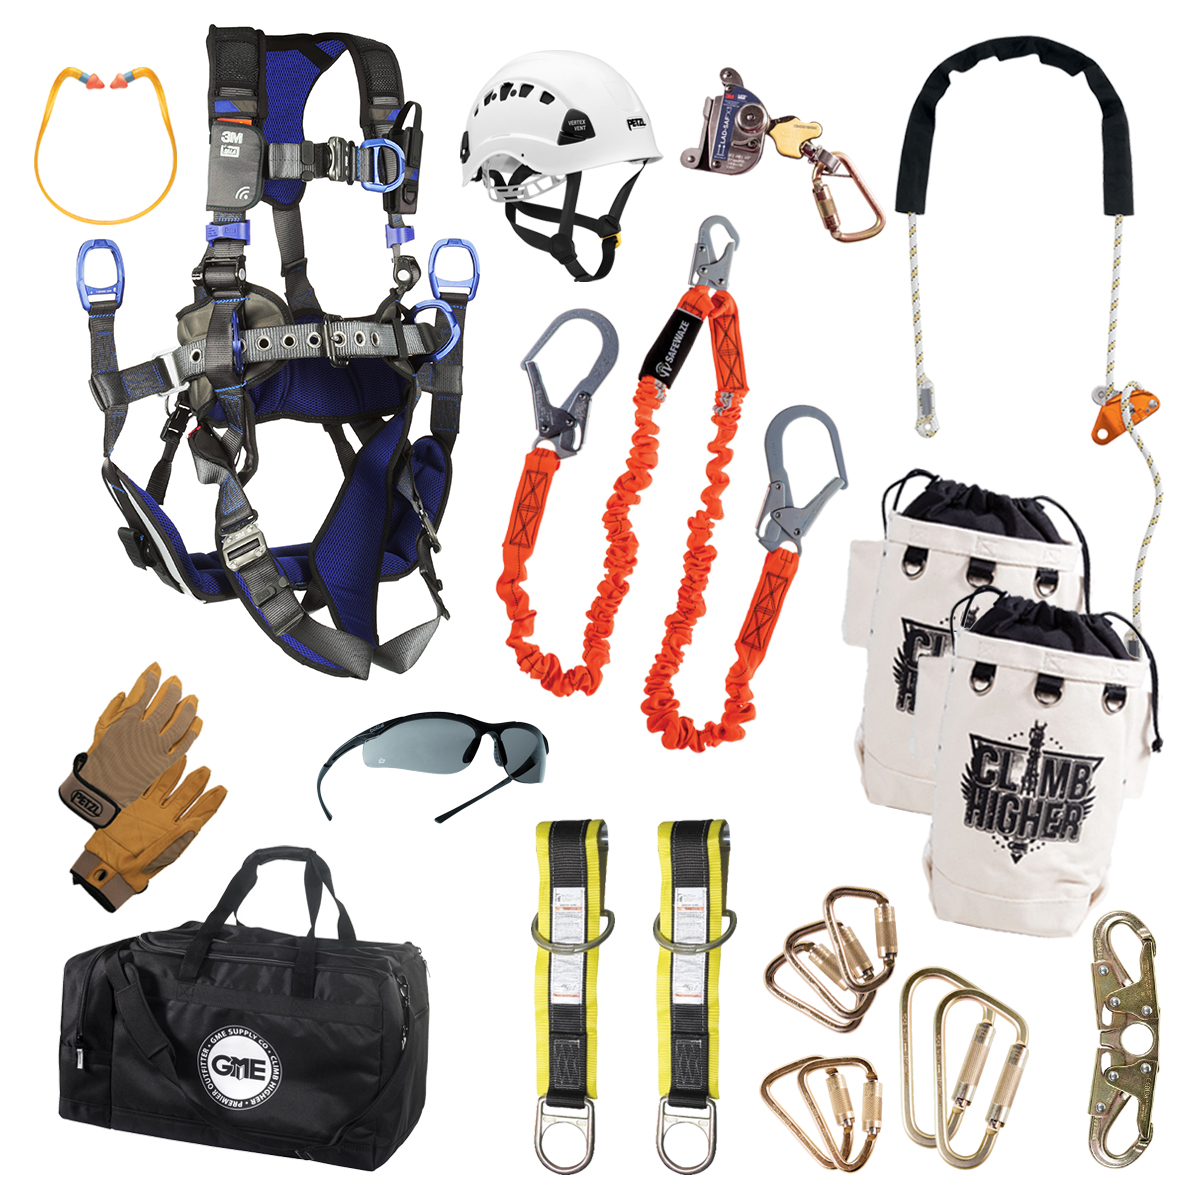 GME Supply 90014 Essentials Tower Climbing Training Kit from GME Supply